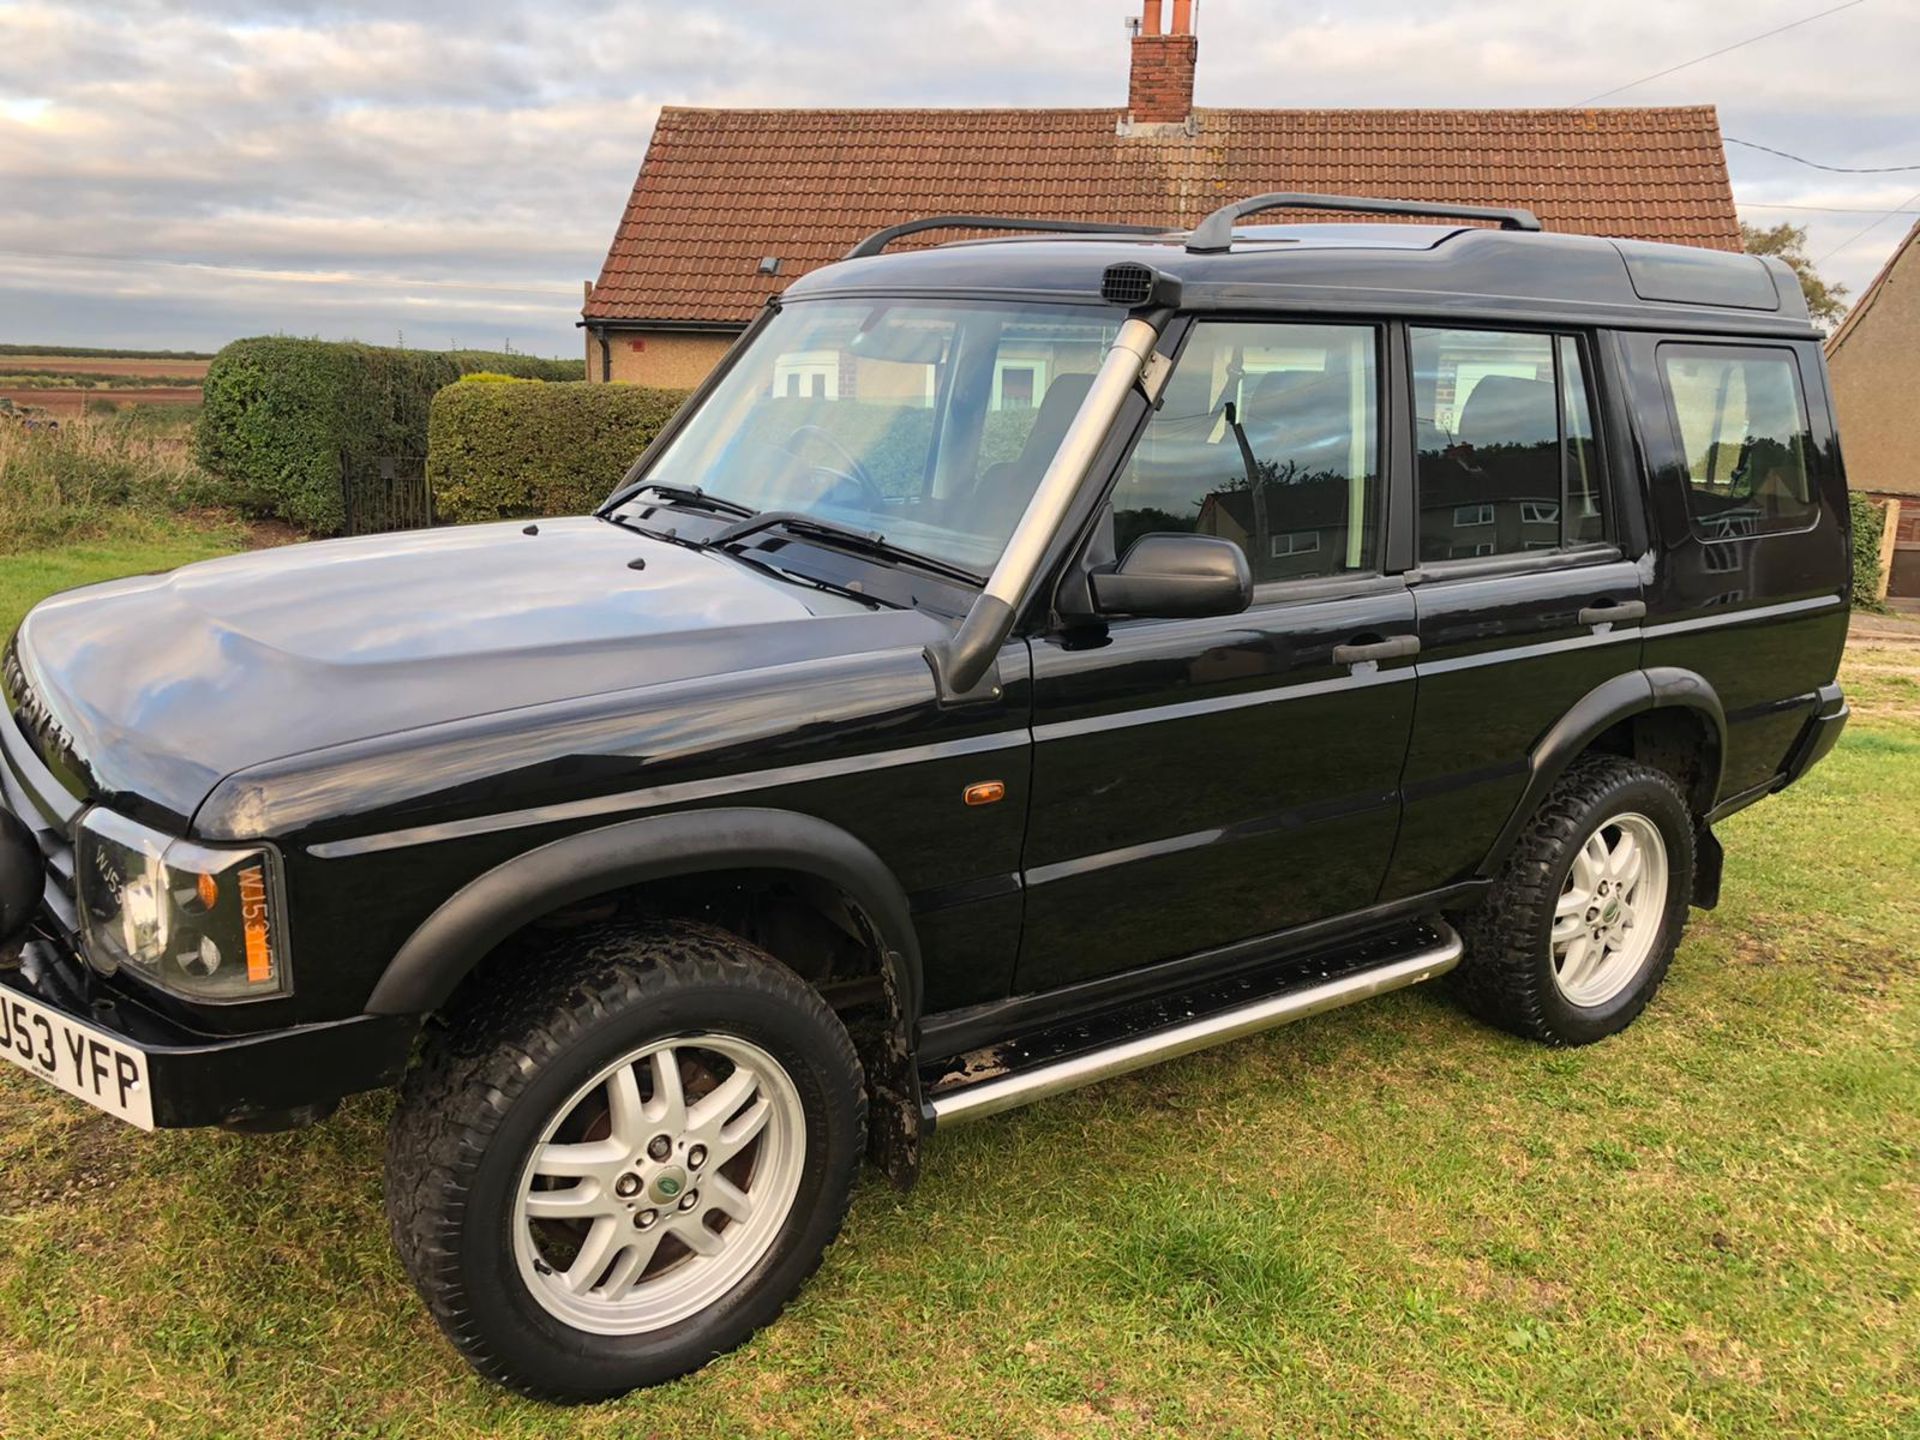 2003 LAND ROVER DISCOVERY TD5 GS AUTO 7 SEAT BLACK ESTATE, 132,559 MILES, 2.5 DIESEL ENGINE *NO VAT* - Image 4 of 15